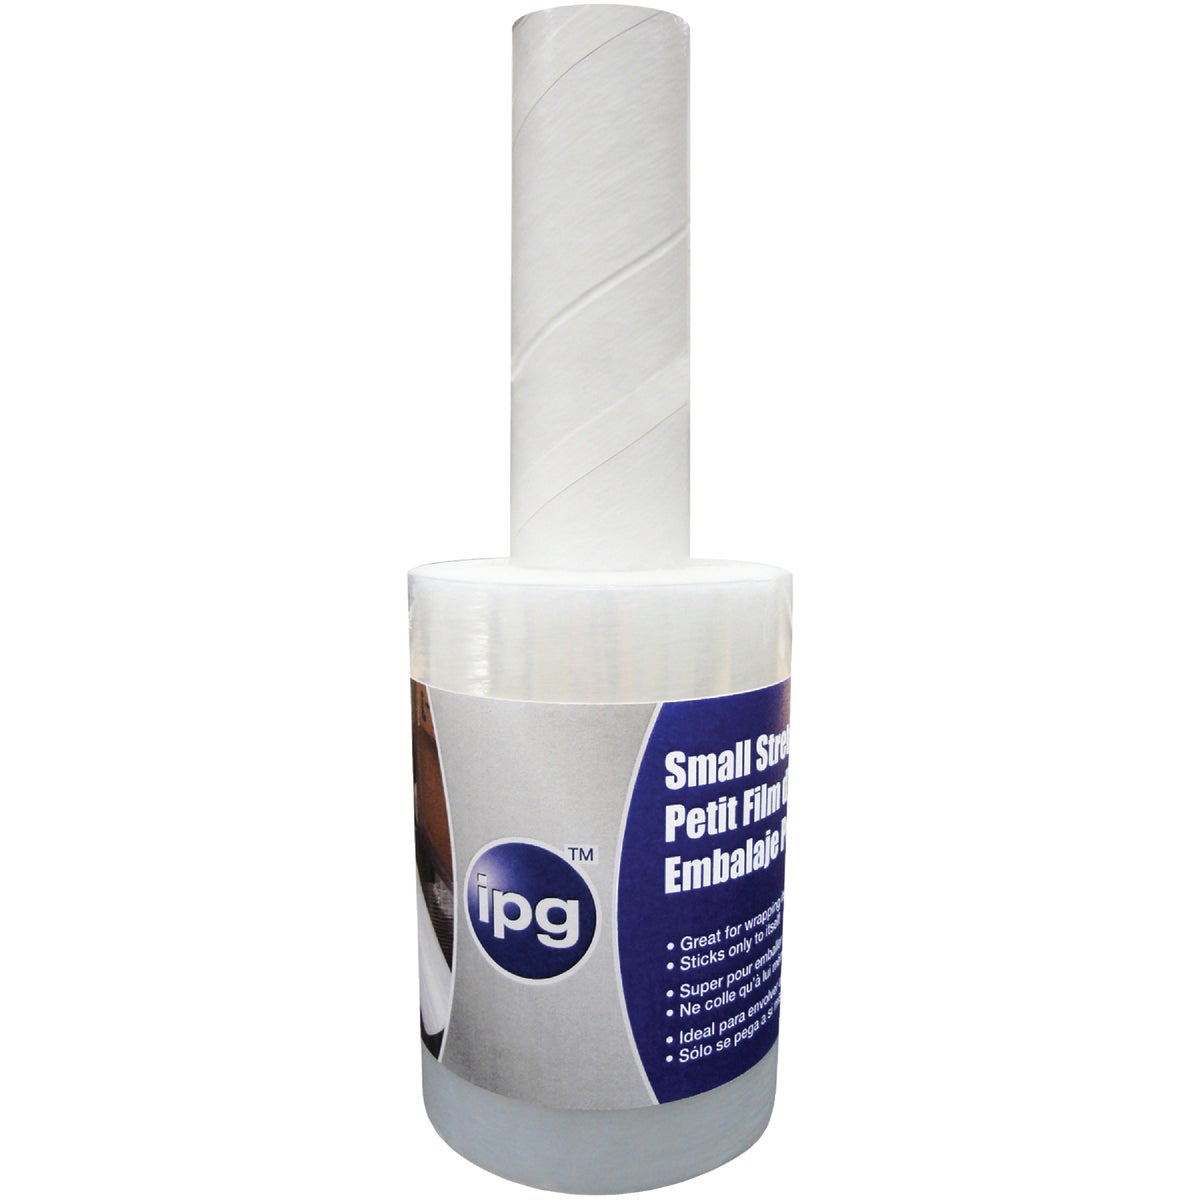 Item 970231, Features lightweight roll to reduce stress in applying wrap and is the same